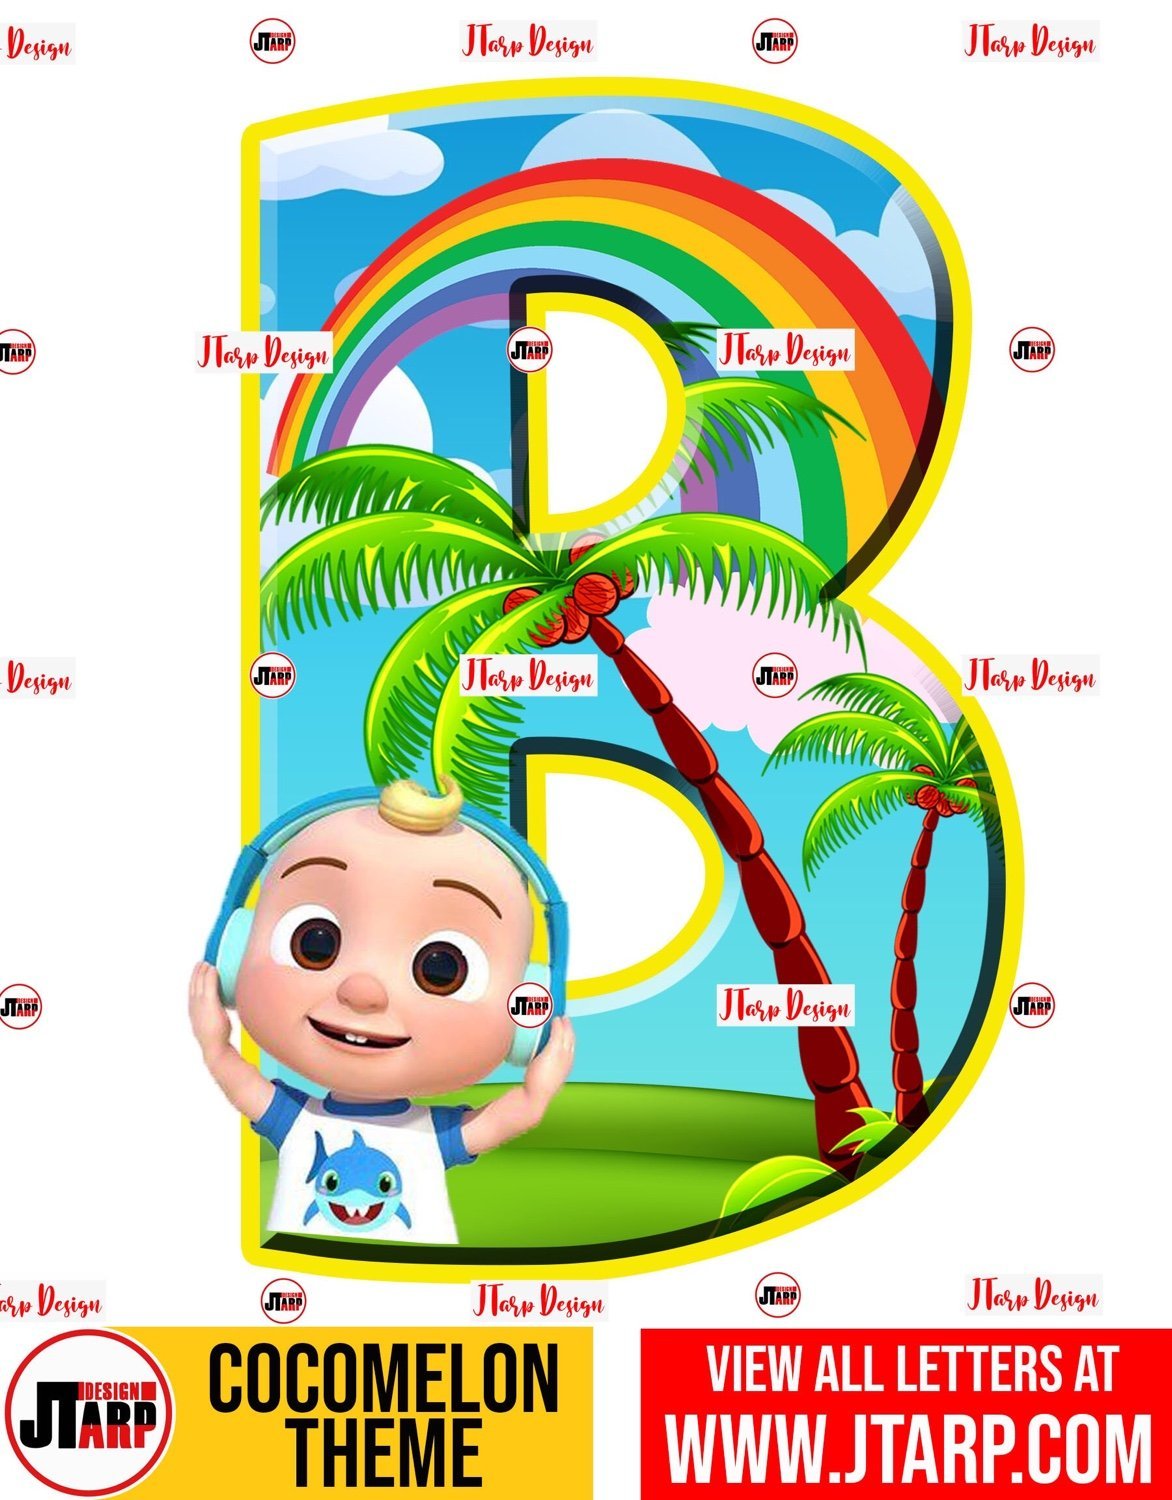 Cocomelon Free Printables: Alphabet Letters and Numbers - Printable